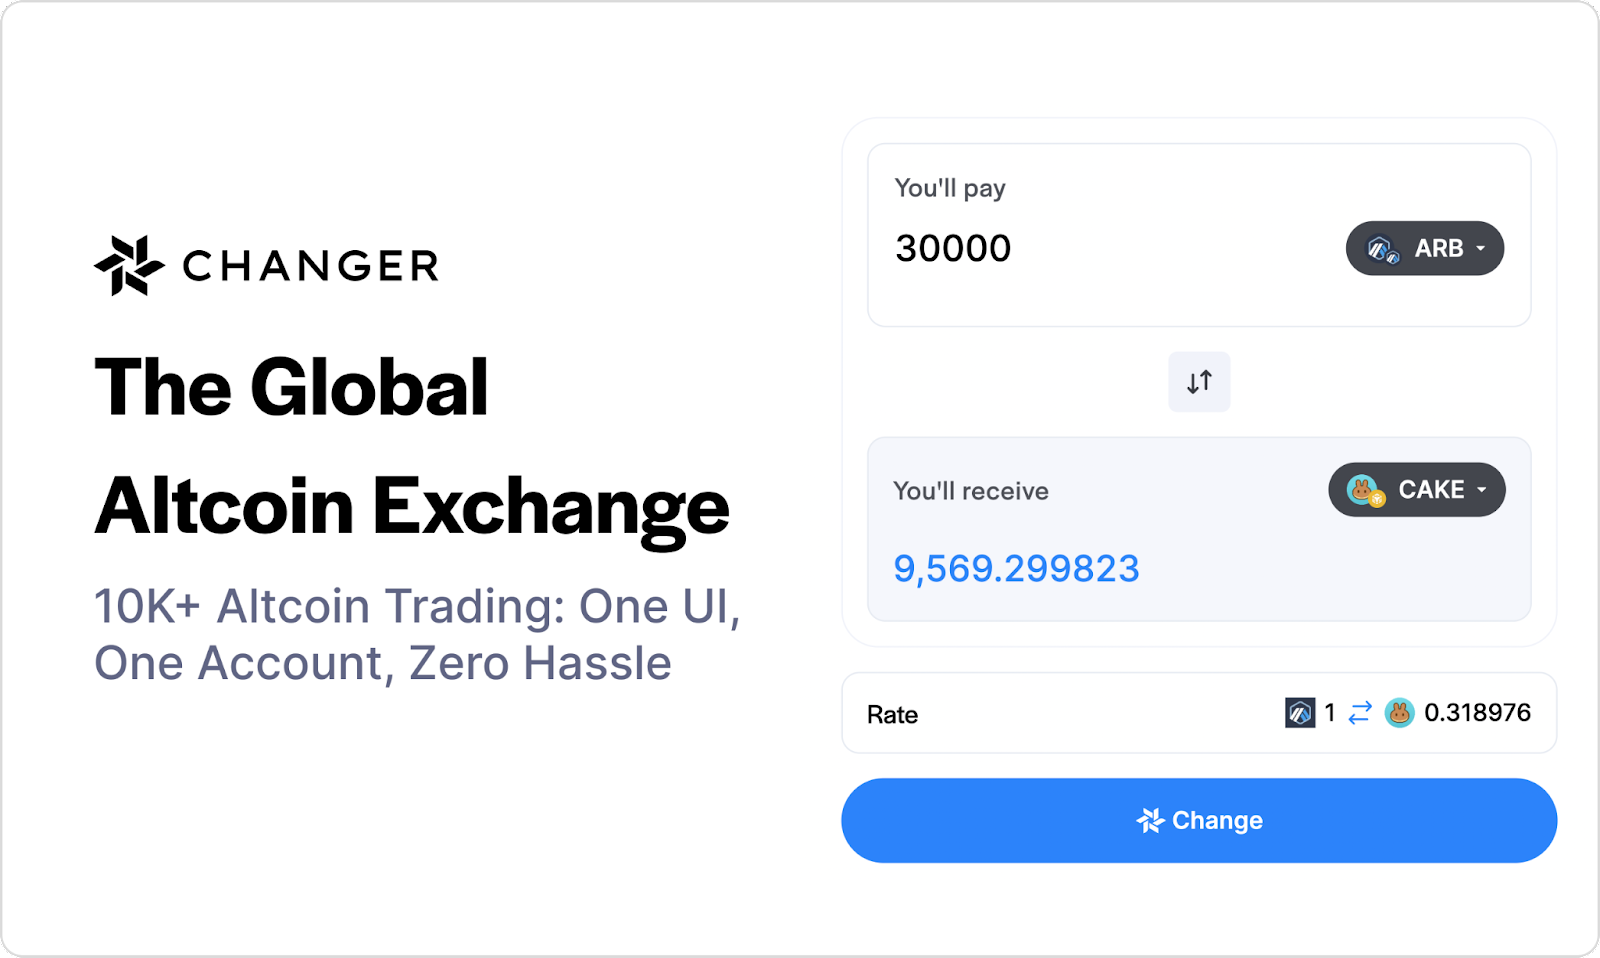 , Changer, the Global Altcoin Exchange, Revolutionizes Crypto Trading with a One-Stop Platform